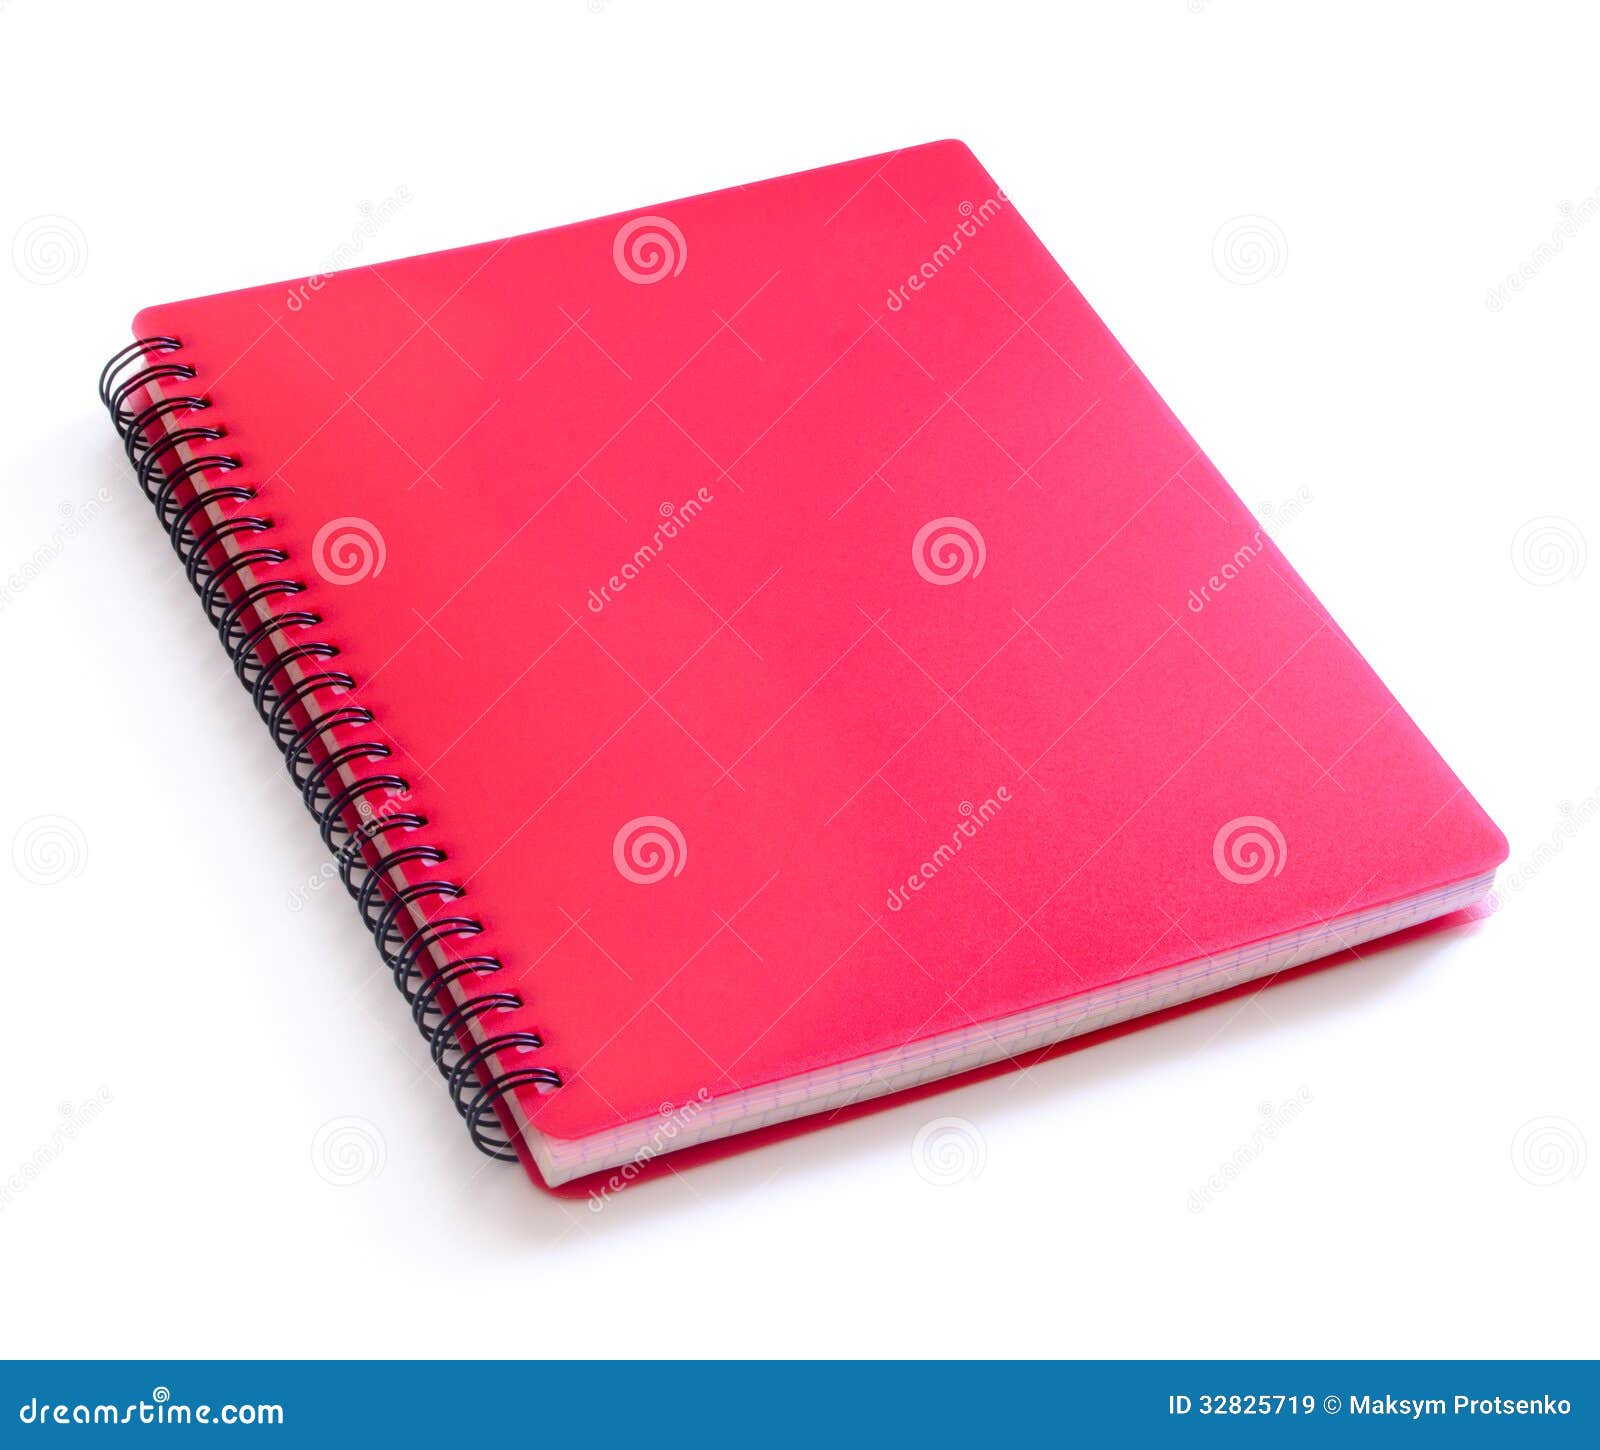 red spiral notebook  on the white background